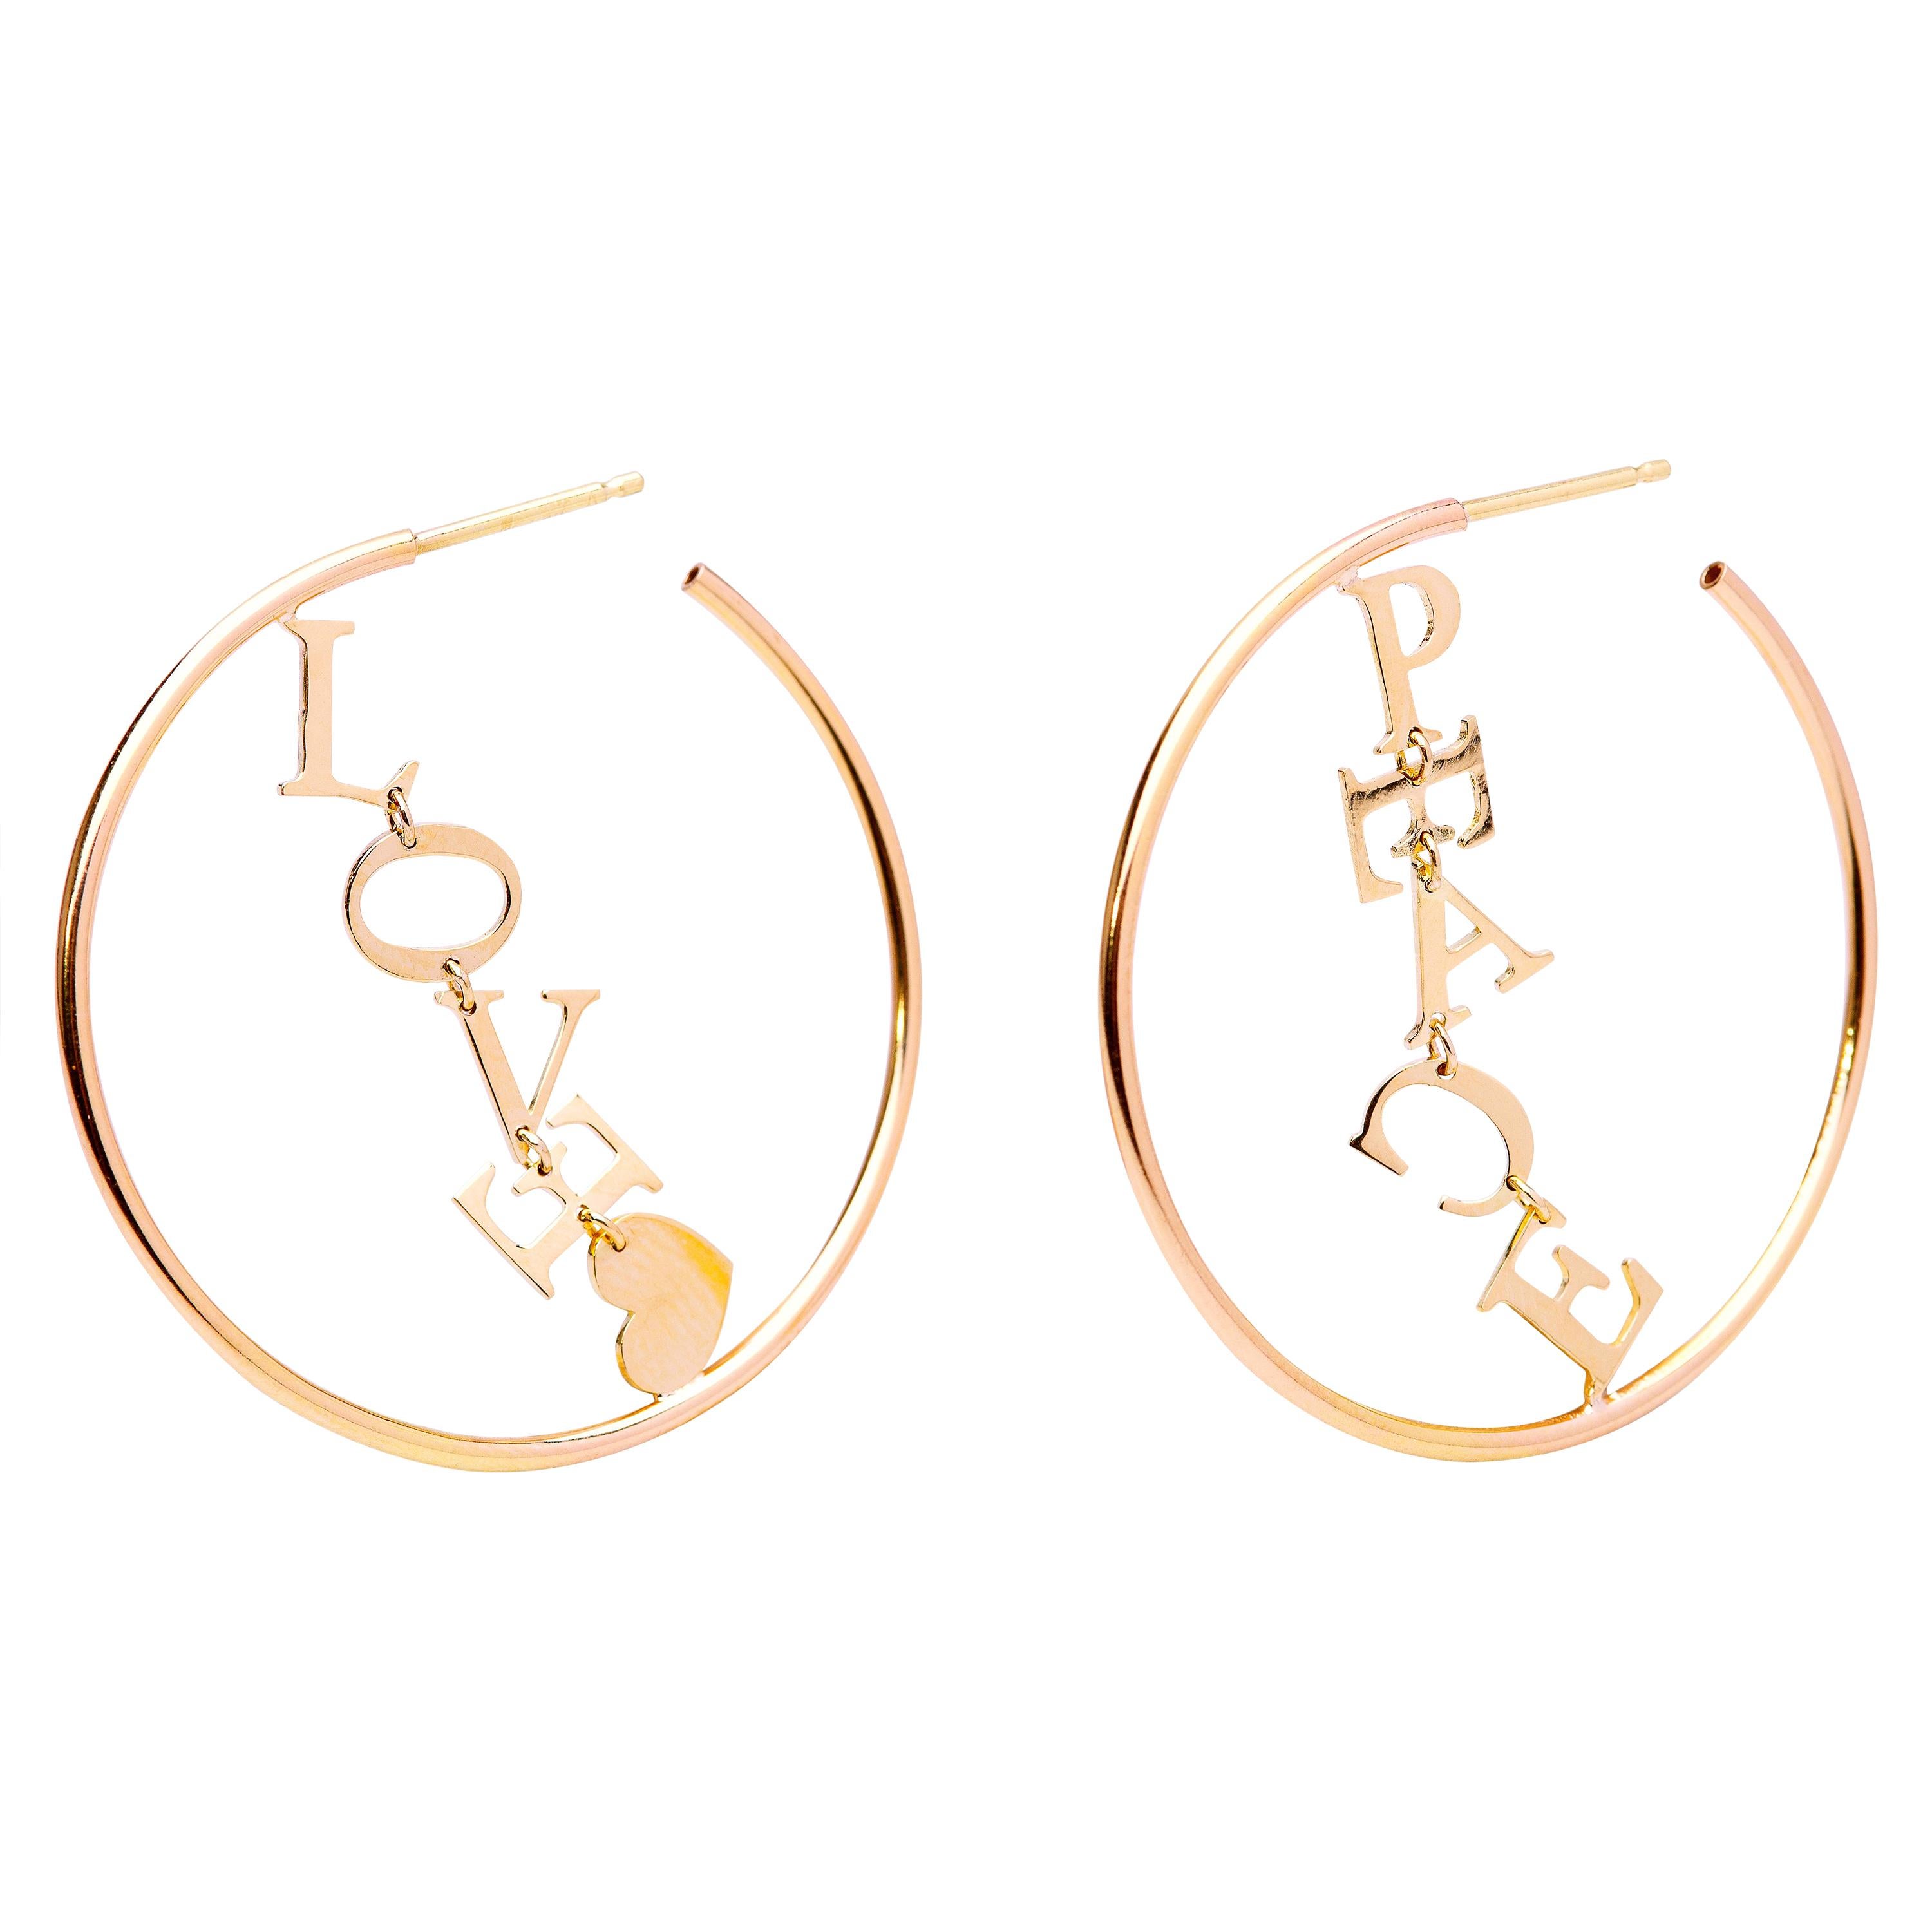 18 Karat Yellow Gold Hoops "Peace And Love" Modern Handcrafted Design Earrings For Sale